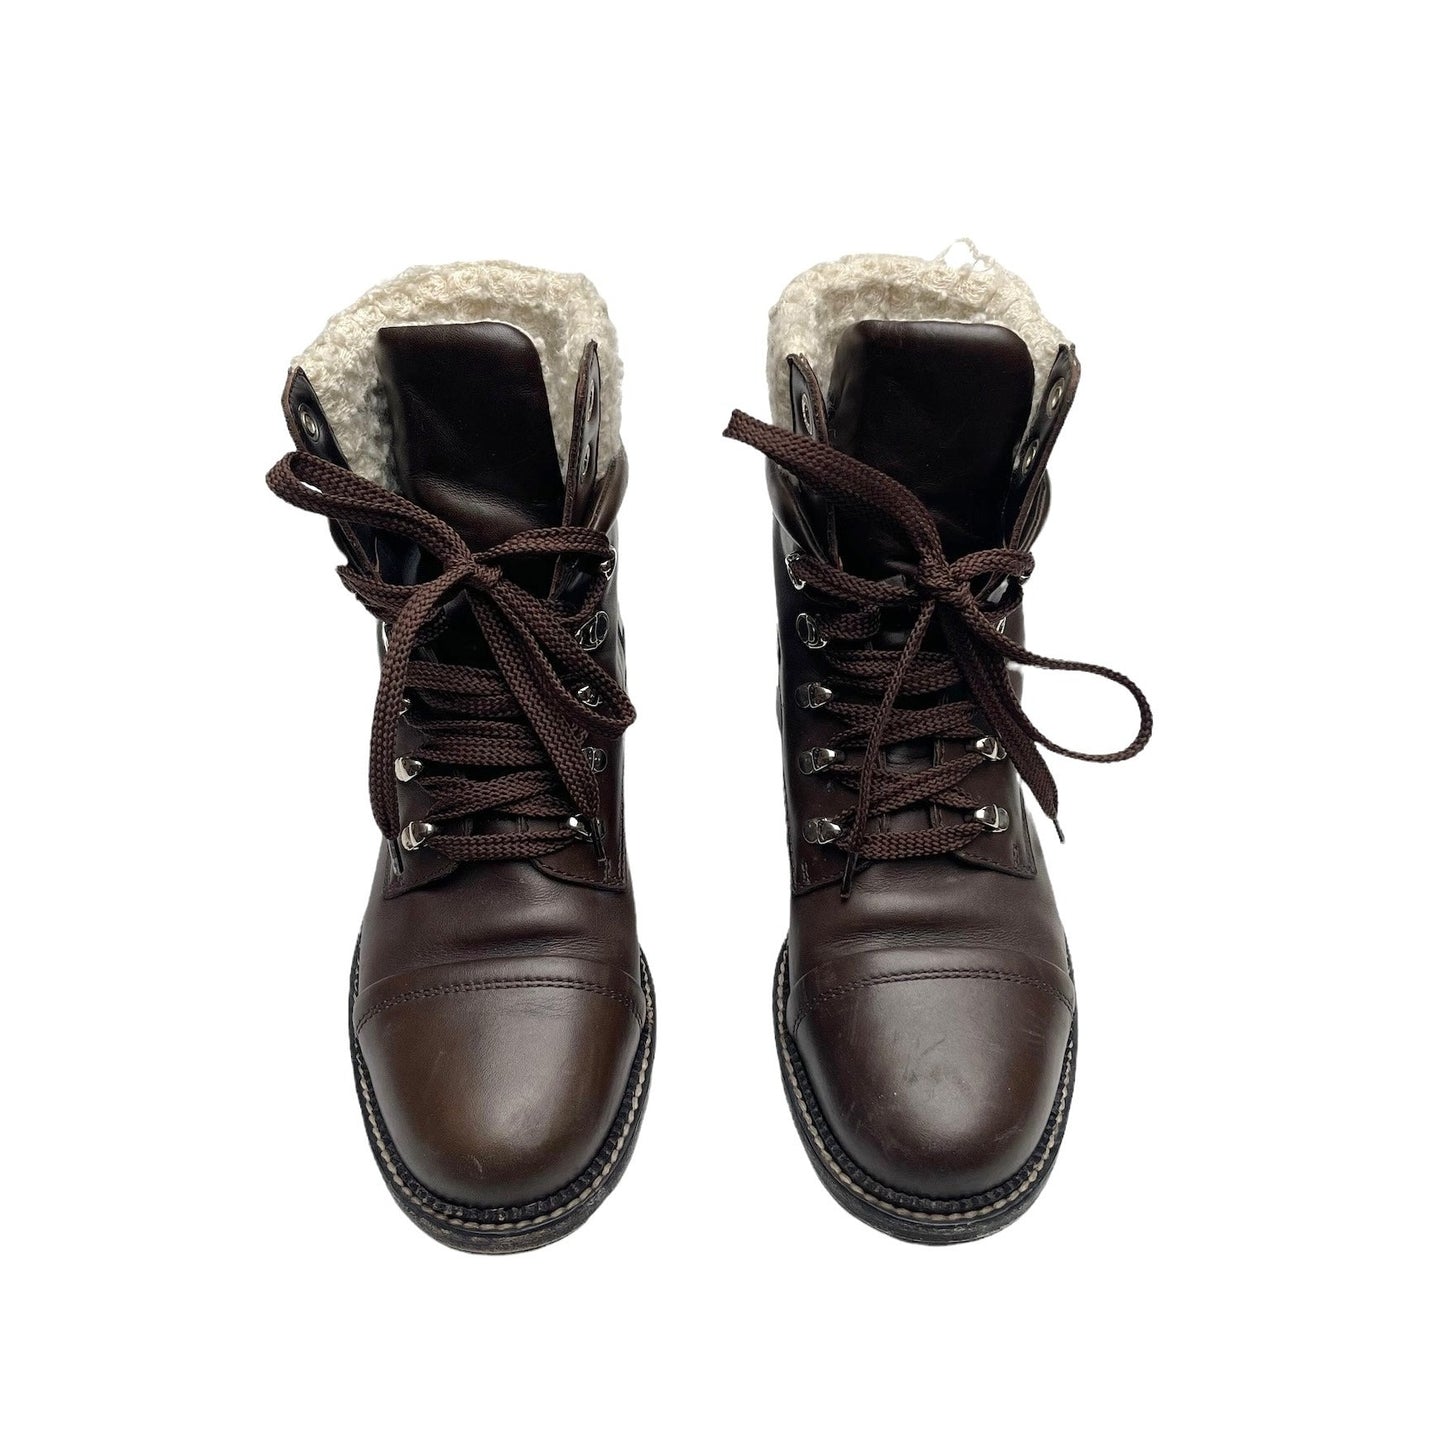 Brown Leather Combat Boots - 8